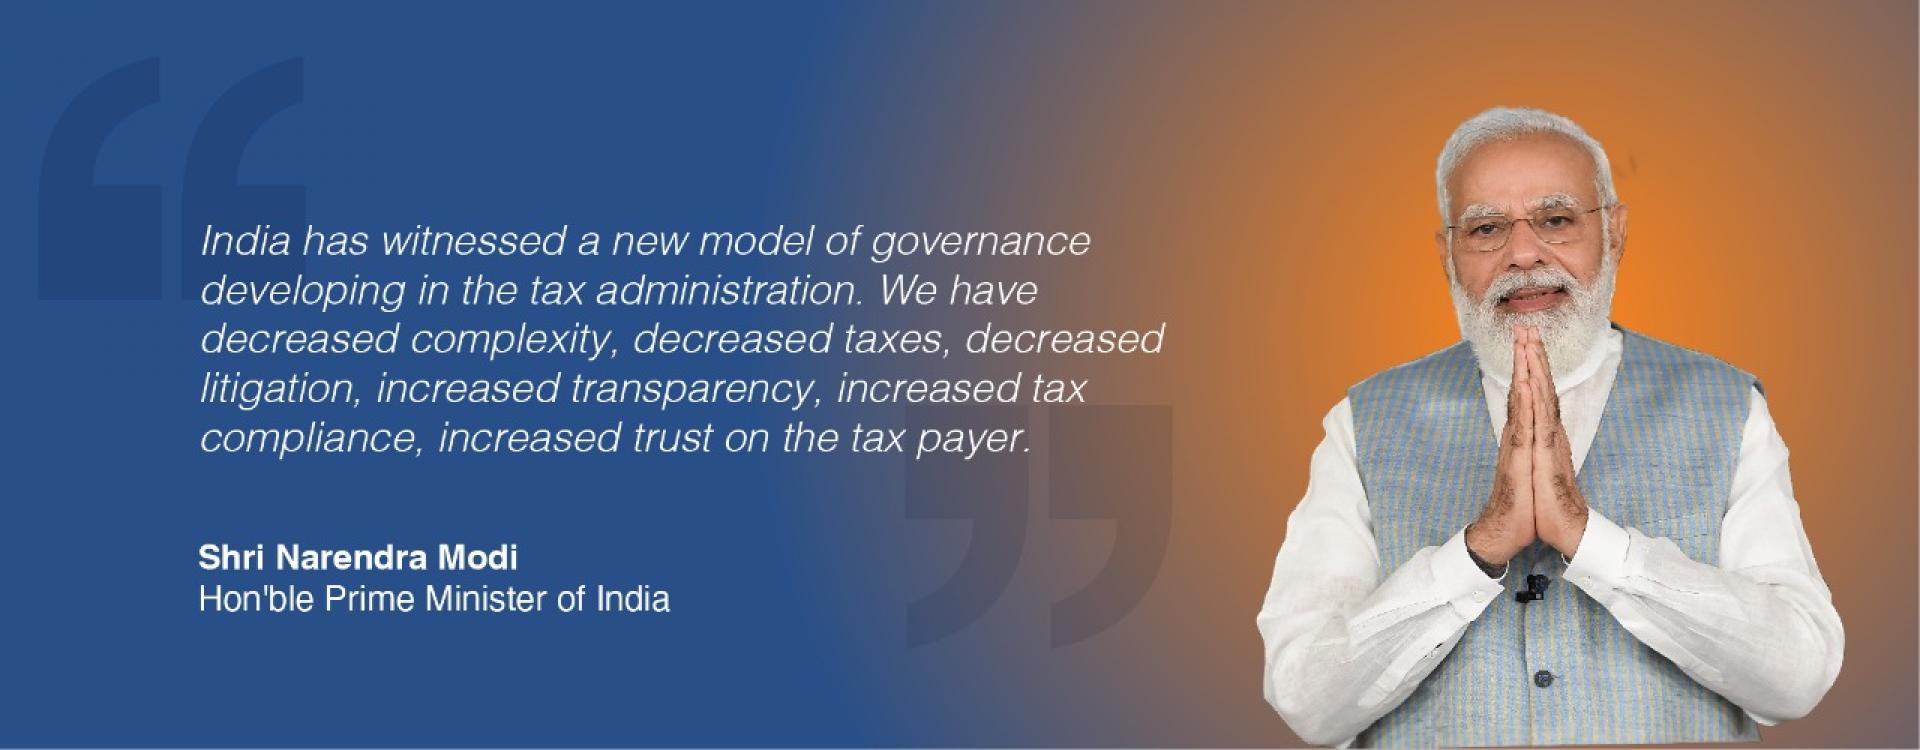 India has witnessed a new model of governance developing in the tax administration. We have decreased complexity, decreased taxes, decreased litigation, increased transparency, increased tax compliance, increased trust on the tax payer.